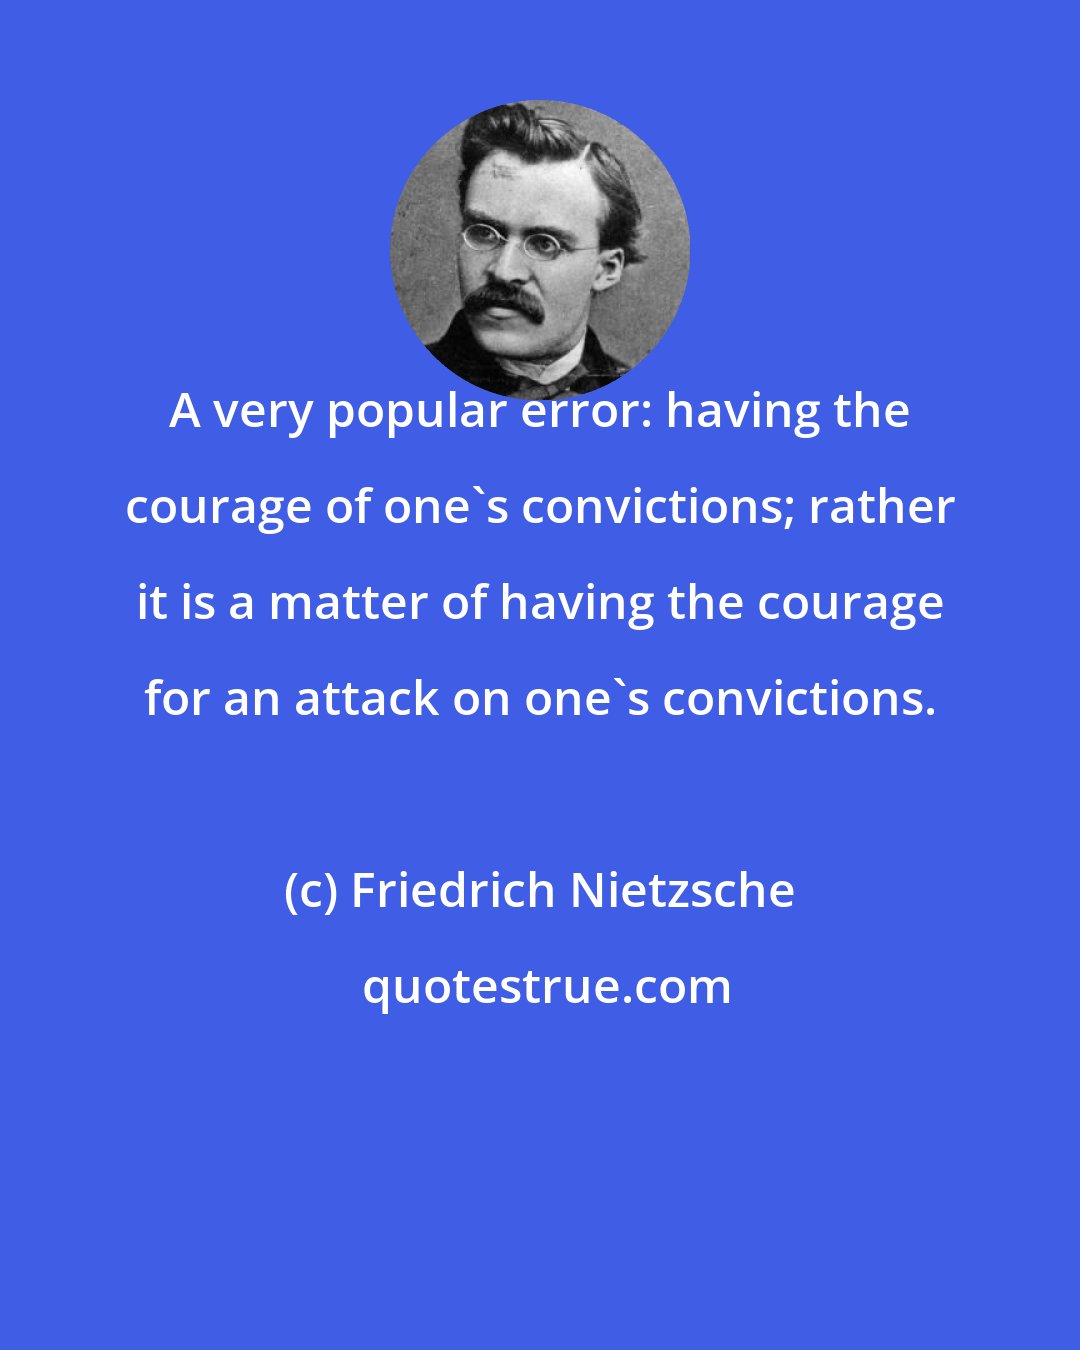 Friedrich Nietzsche: A very popular error: having the courage of one's convictions; rather it is a matter of having the courage for an attack on one's convictions.